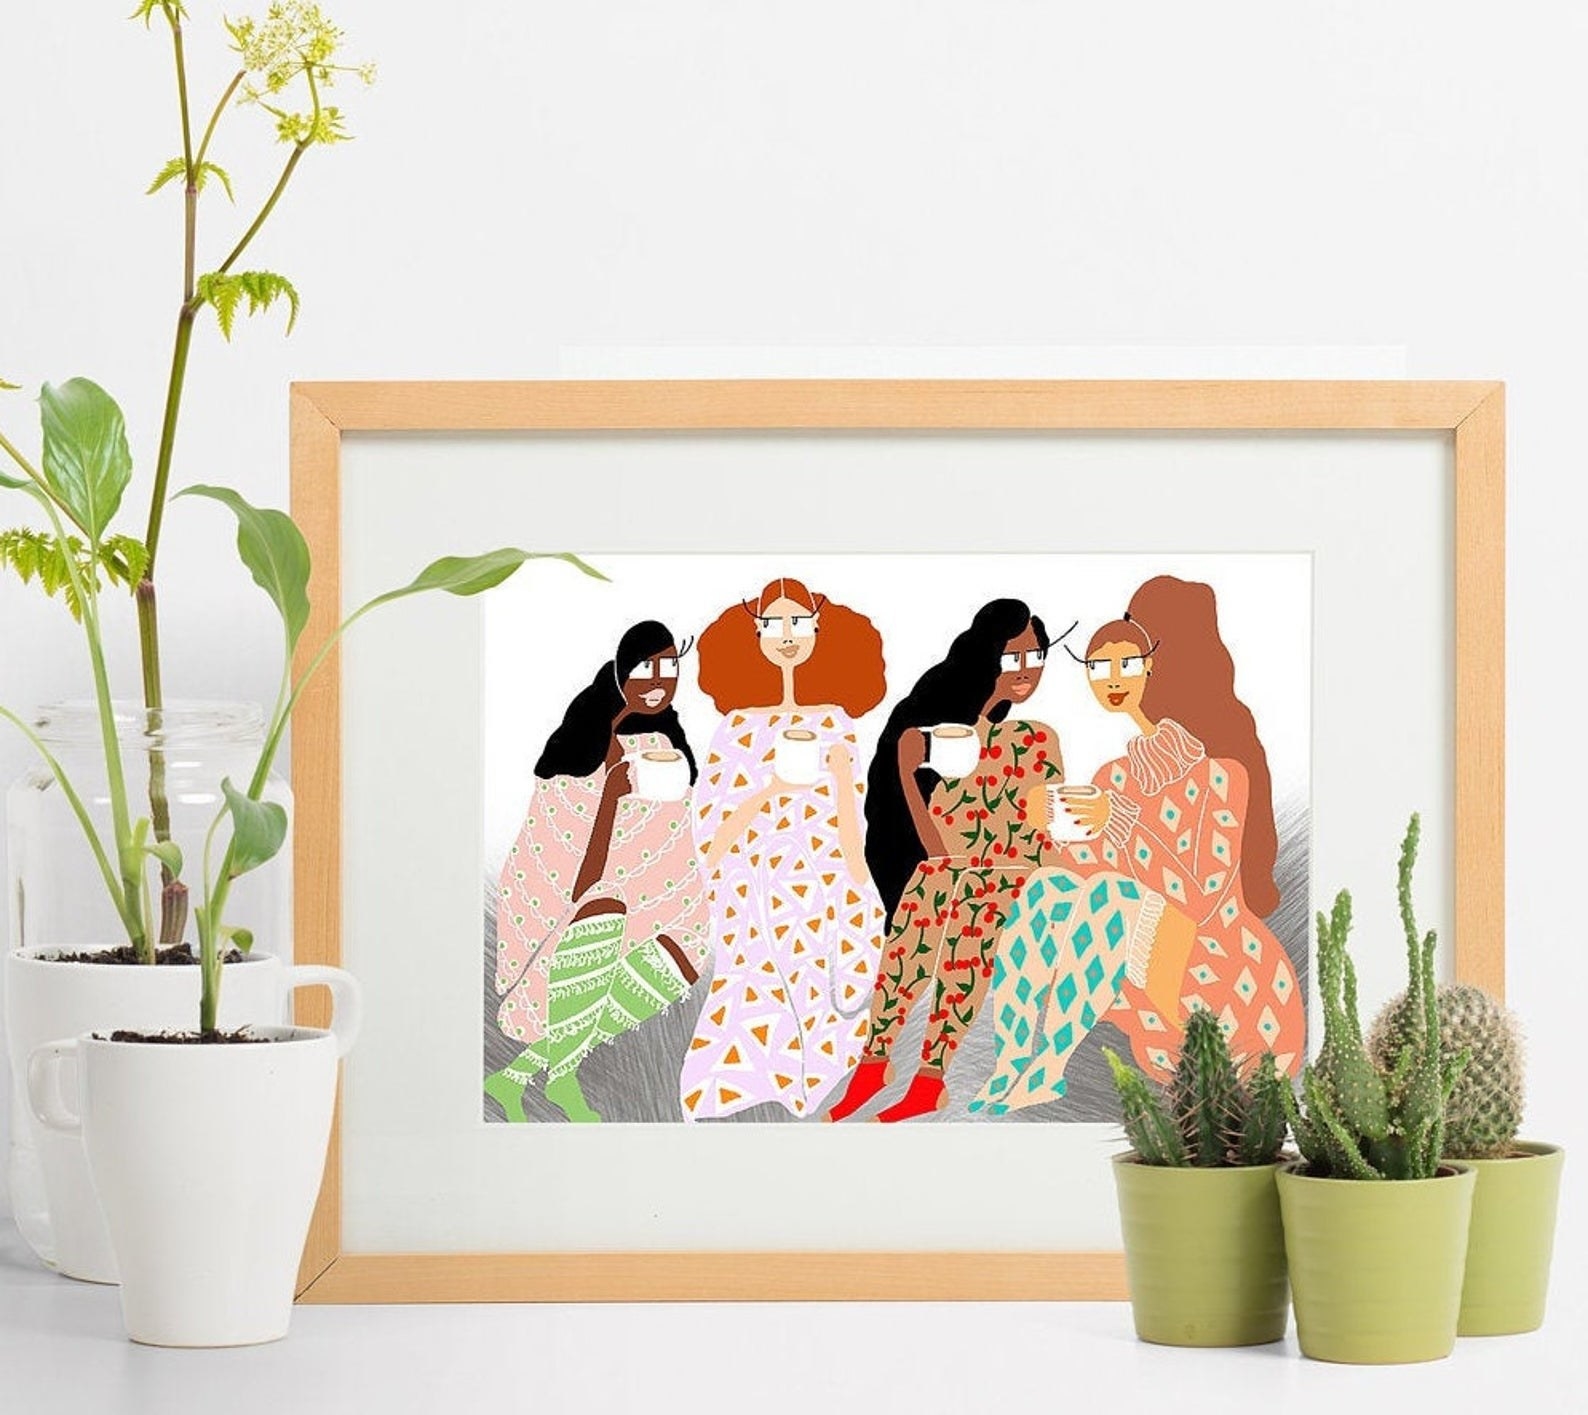 the rectangle art print with illustrations of four people sitting together with coffee cups in their hands